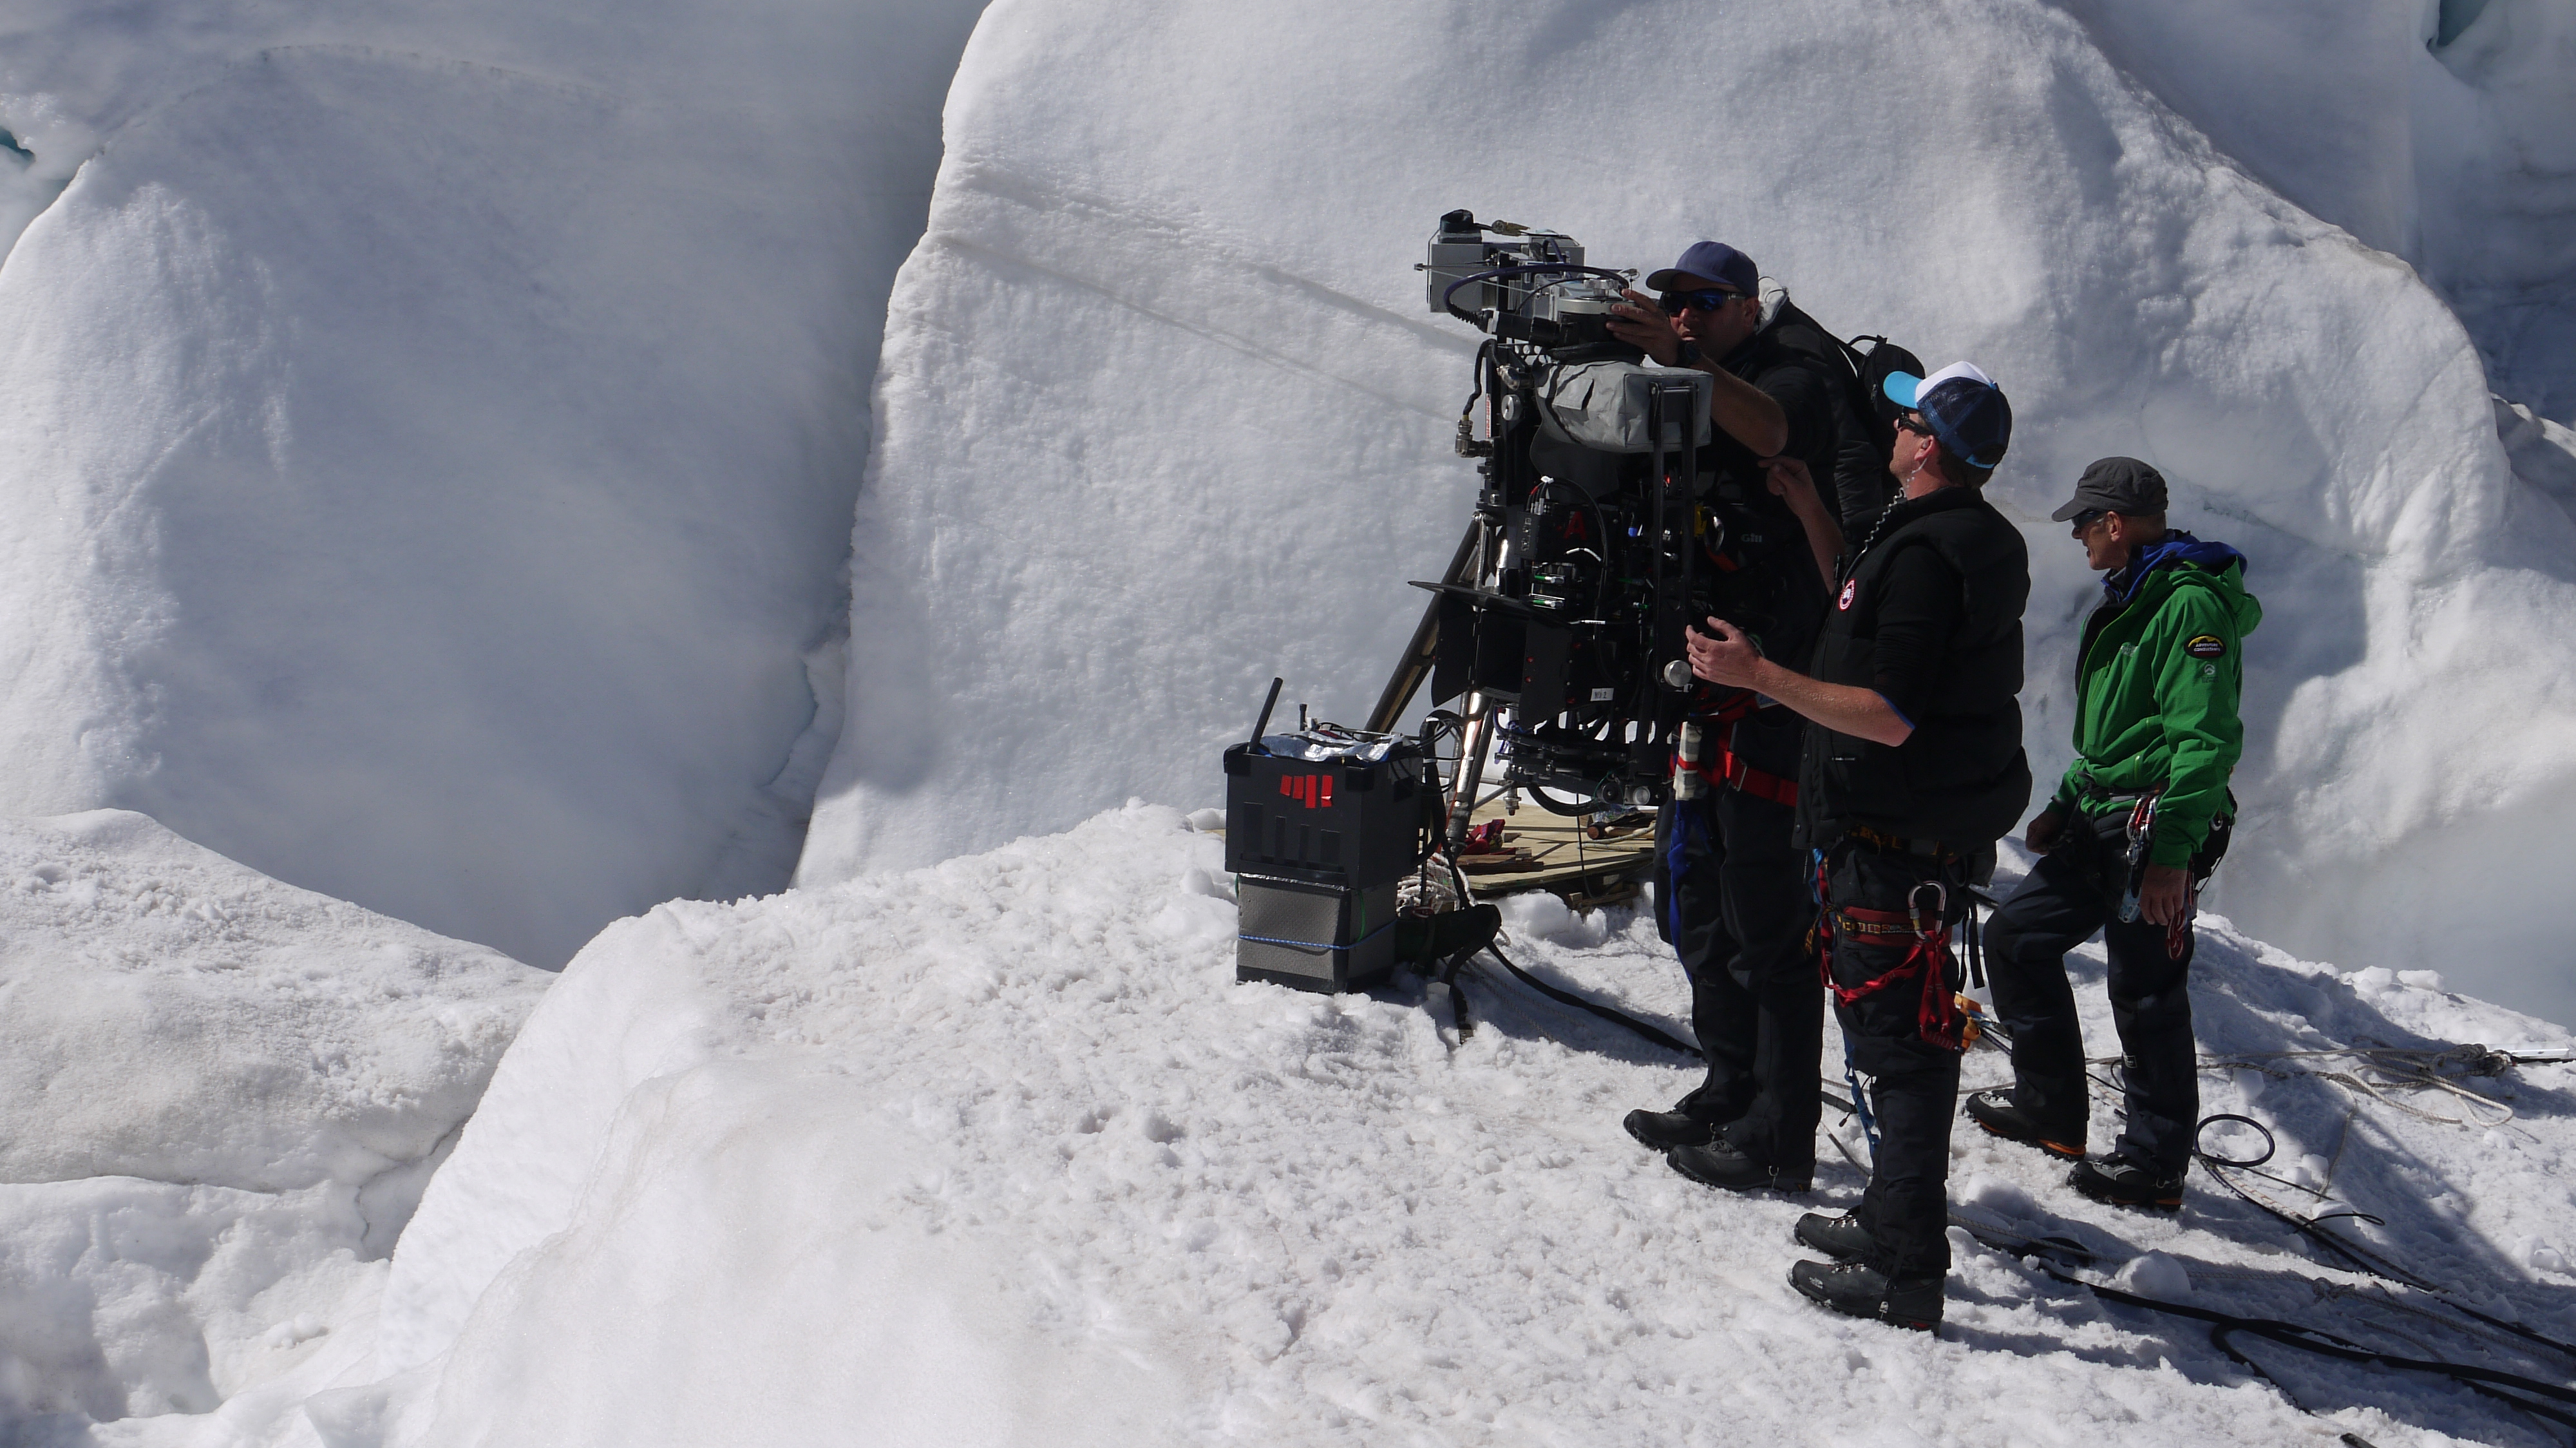 Filming in mountain locations. this time in New Zealand on Beyond the Edge